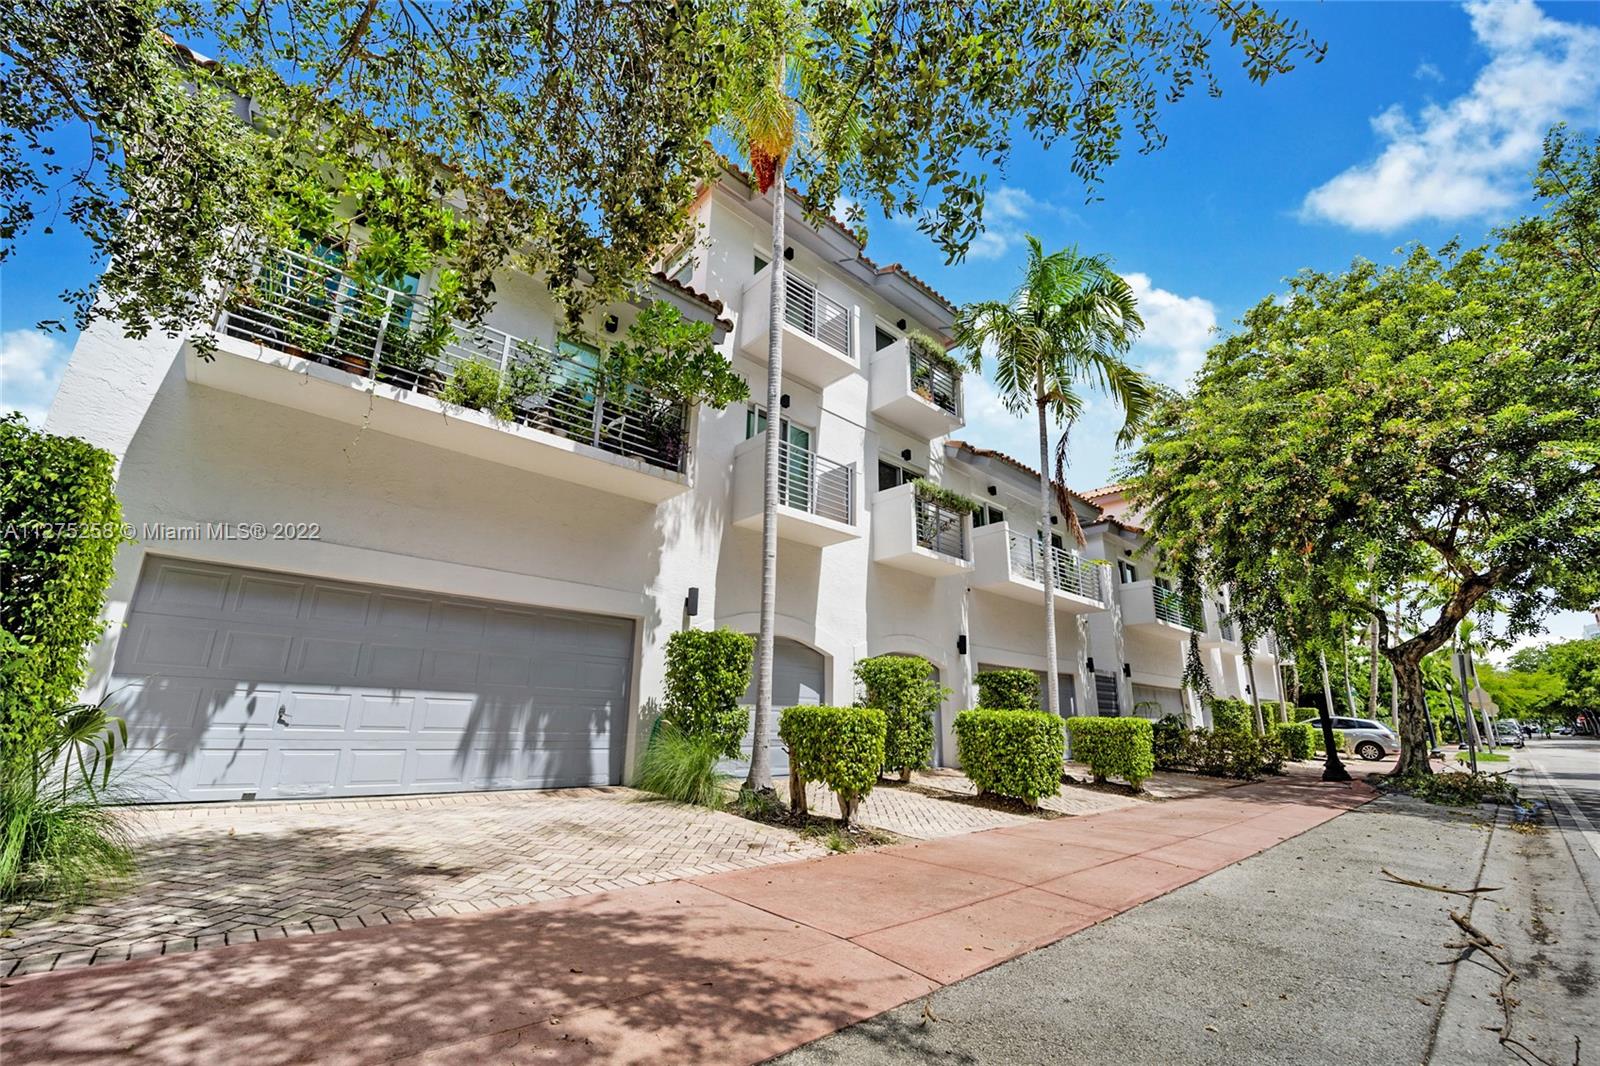 Rarely available, this stunning, remodeled 3BR/2.5BA two-story townhome with 2 car private garage, is located in the coveted South of Fifth neighborhood. Features include 2 balconies and a private patio, Miele kitchen appliances, custom closets, master walk in closet, hurricane impact windows, electric window shades, newer A/C, Nest temperature system, and low HOA fees. Enjoy a BBQ or plant a garden in your private, first floor patio or relax on your 2nd floor balconies.